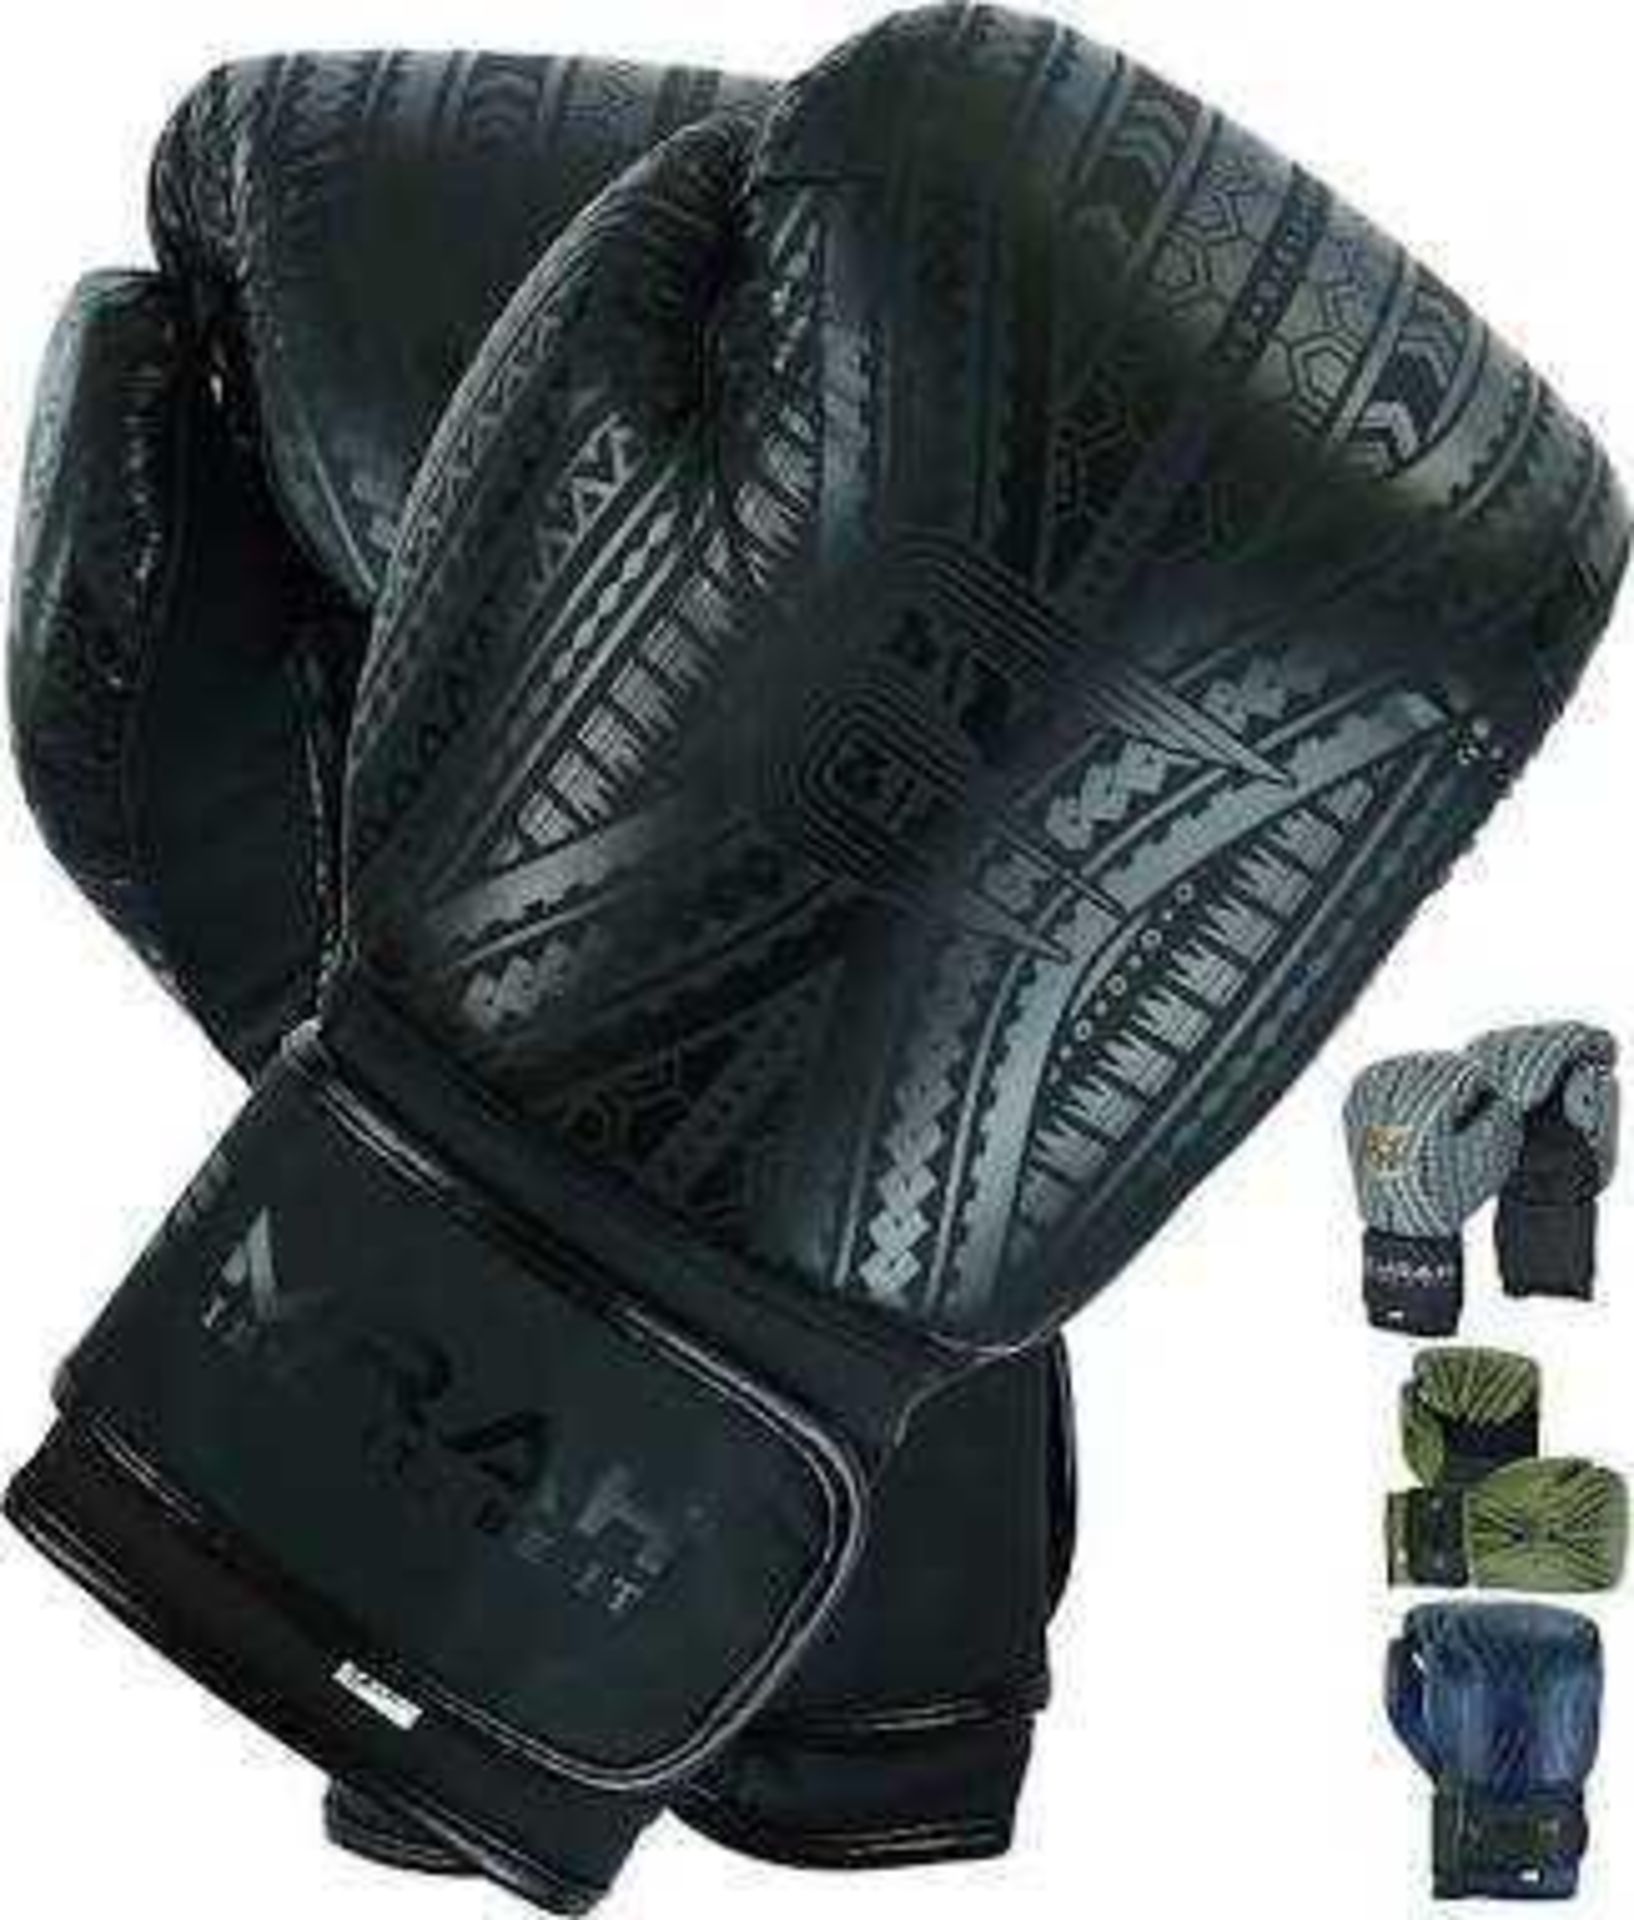 RRP £300 Lot To Contain X9 Items Including - Emrha Sports Boxing Gloves